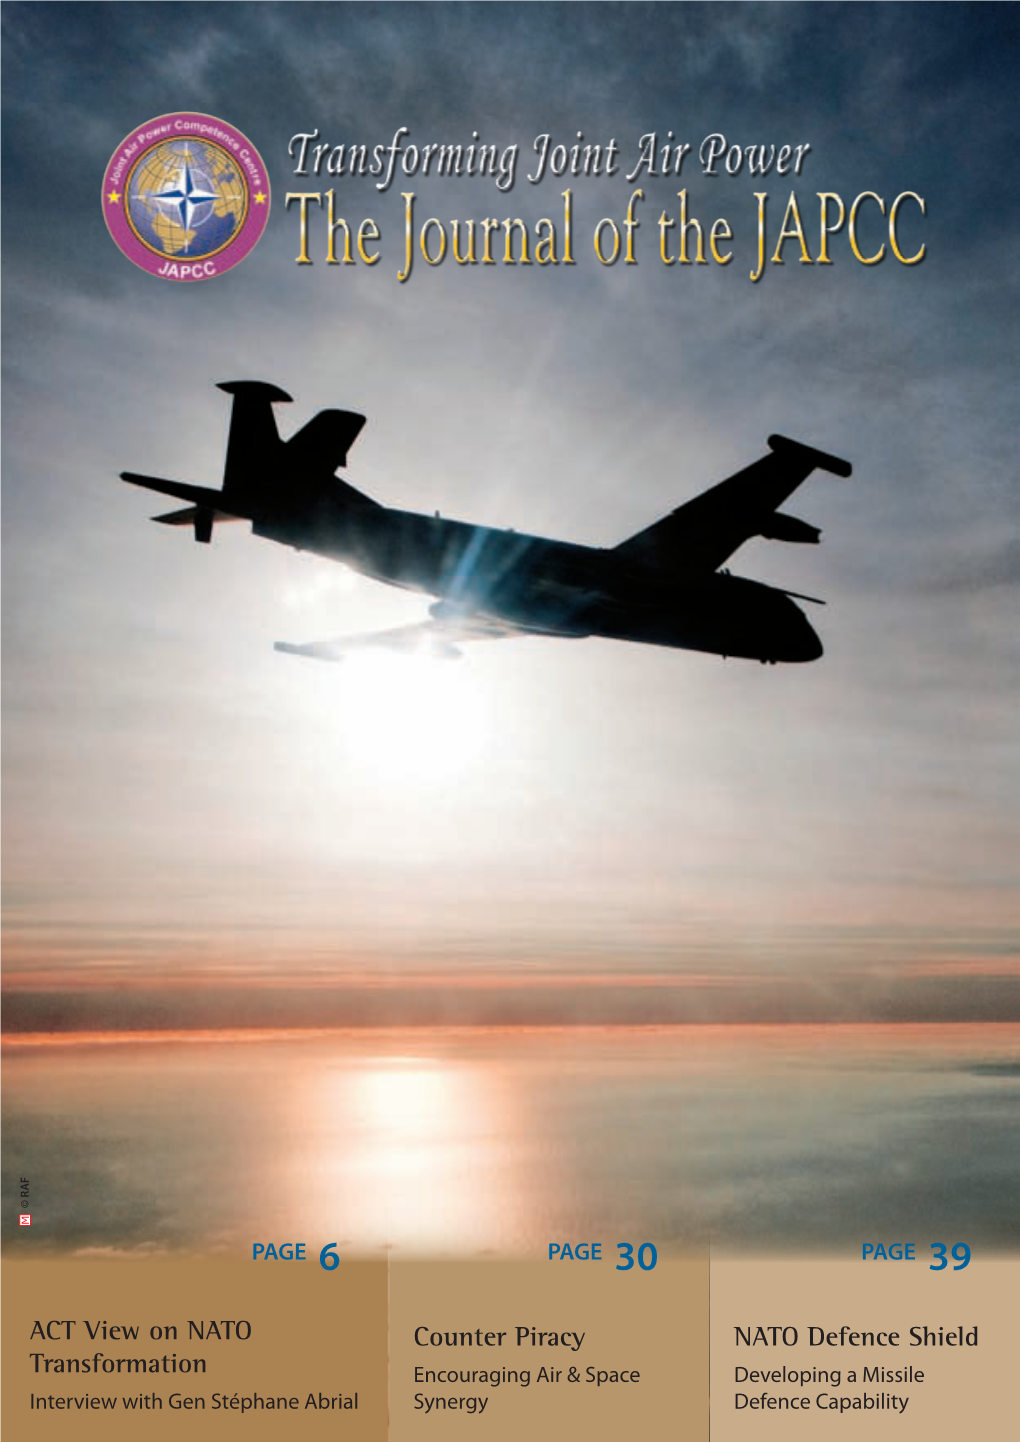 The Journal of the JAPCC Welcomes Unsolicited Manuscripts of 1500 Words in Length